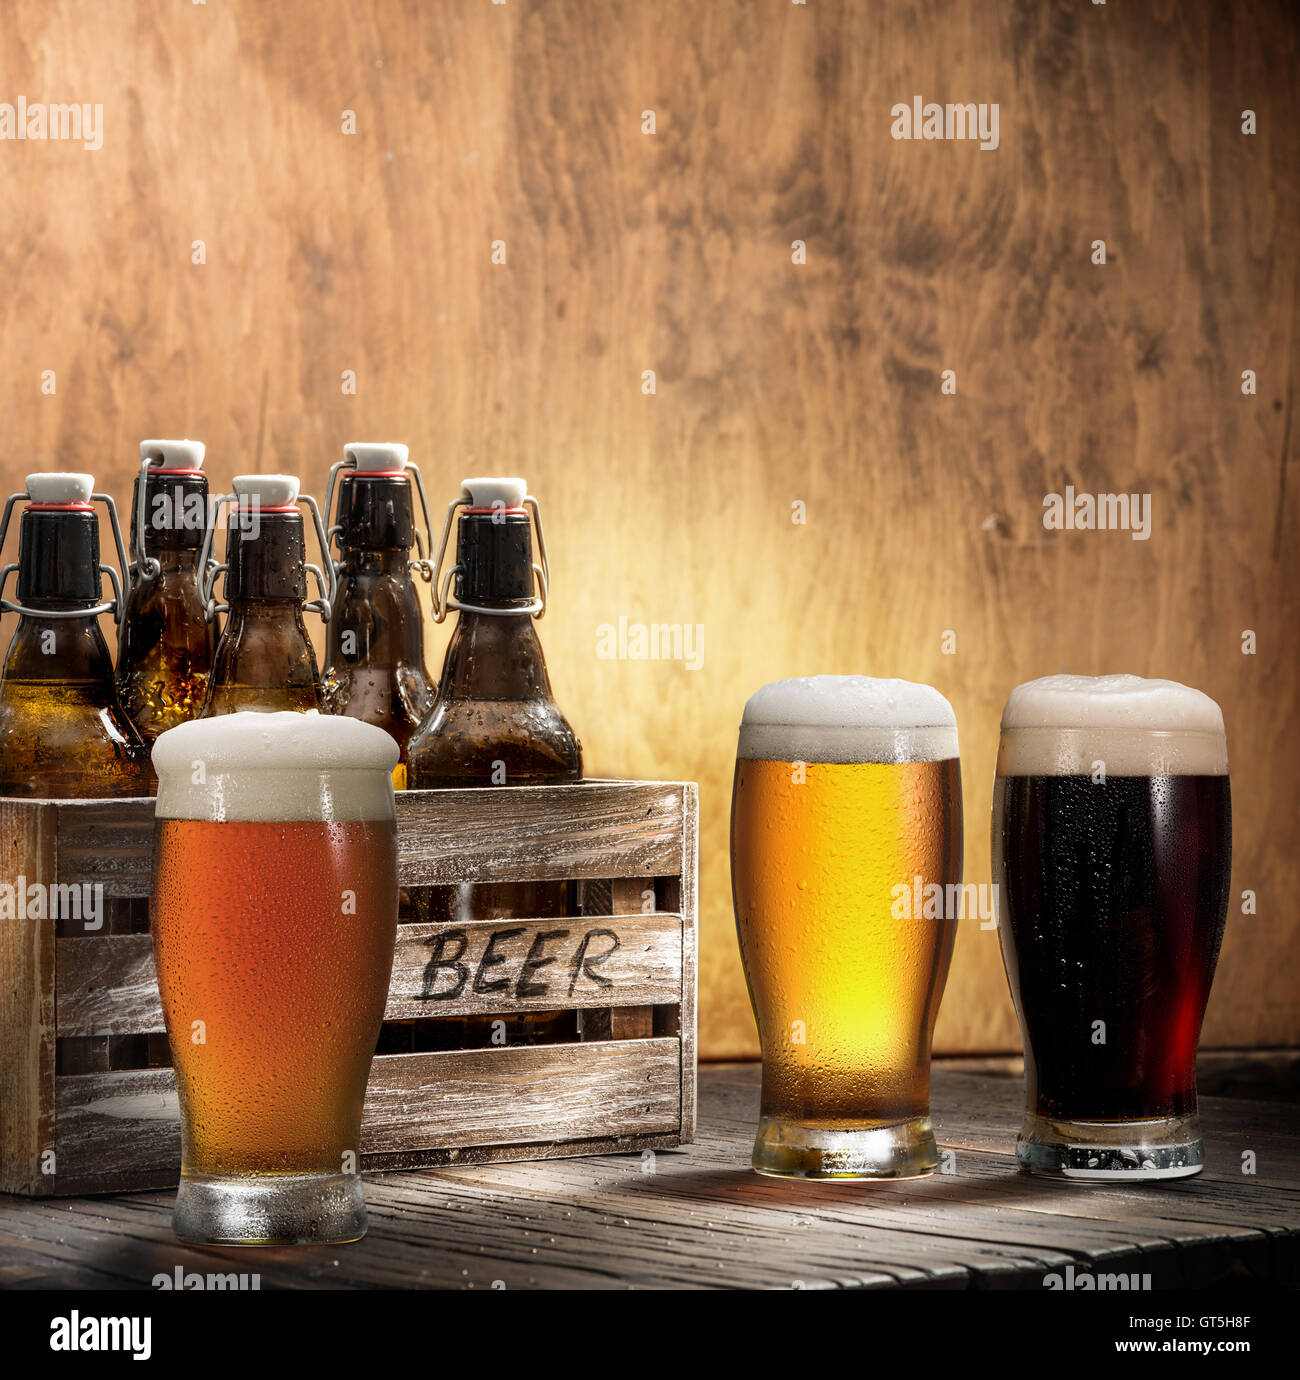 Crafting beer in bottles and glasses. On top of a wooden background. Stock Photo